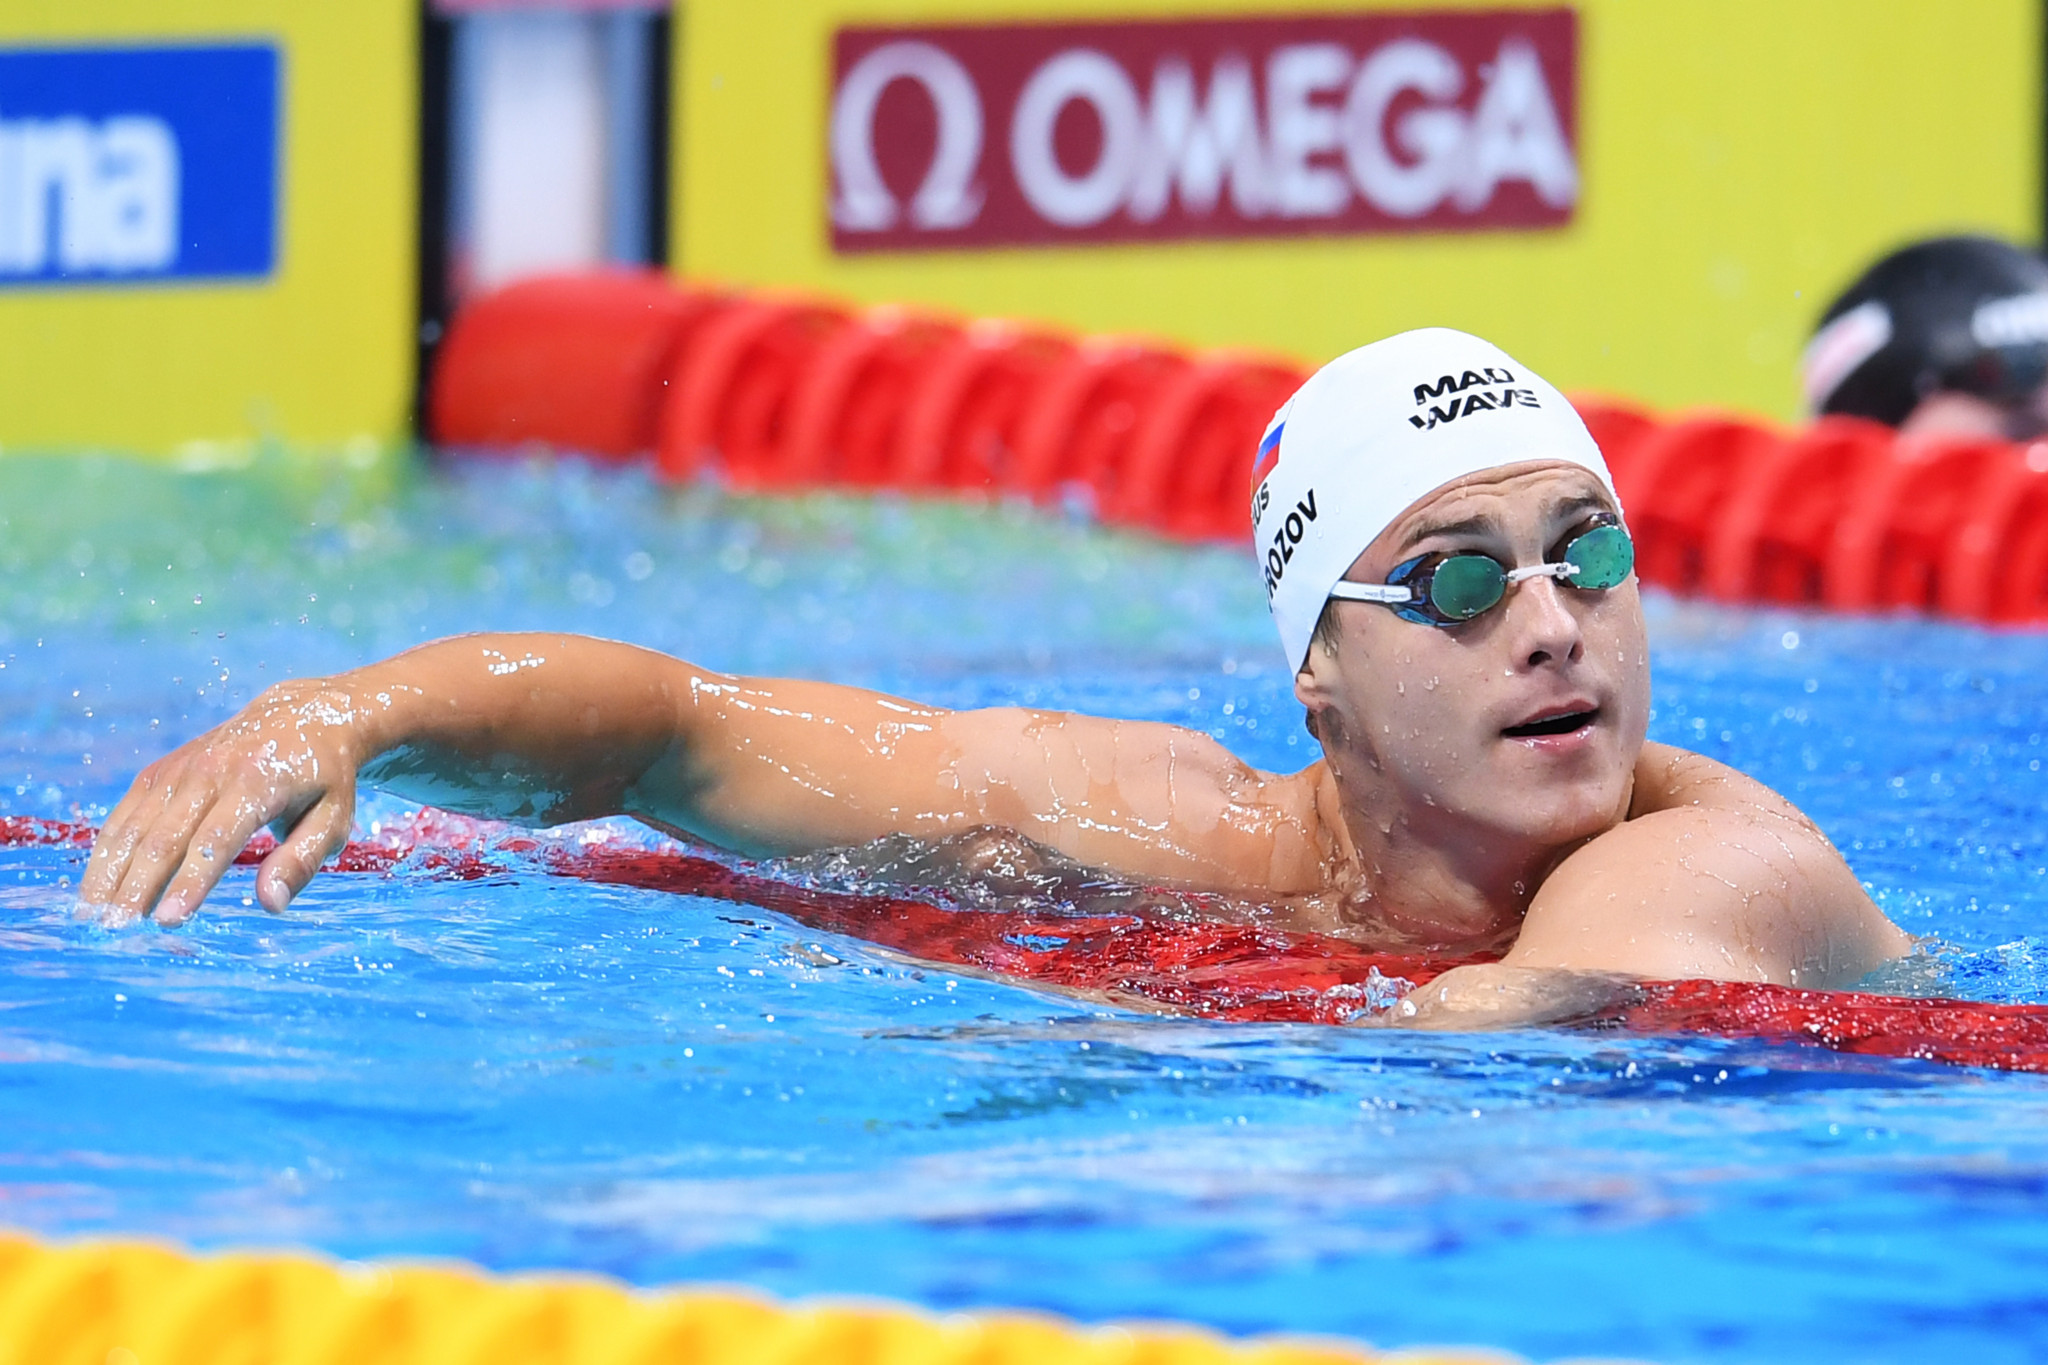 Vladimir Morozov leads the men's World Cup rankings ©Getty Images